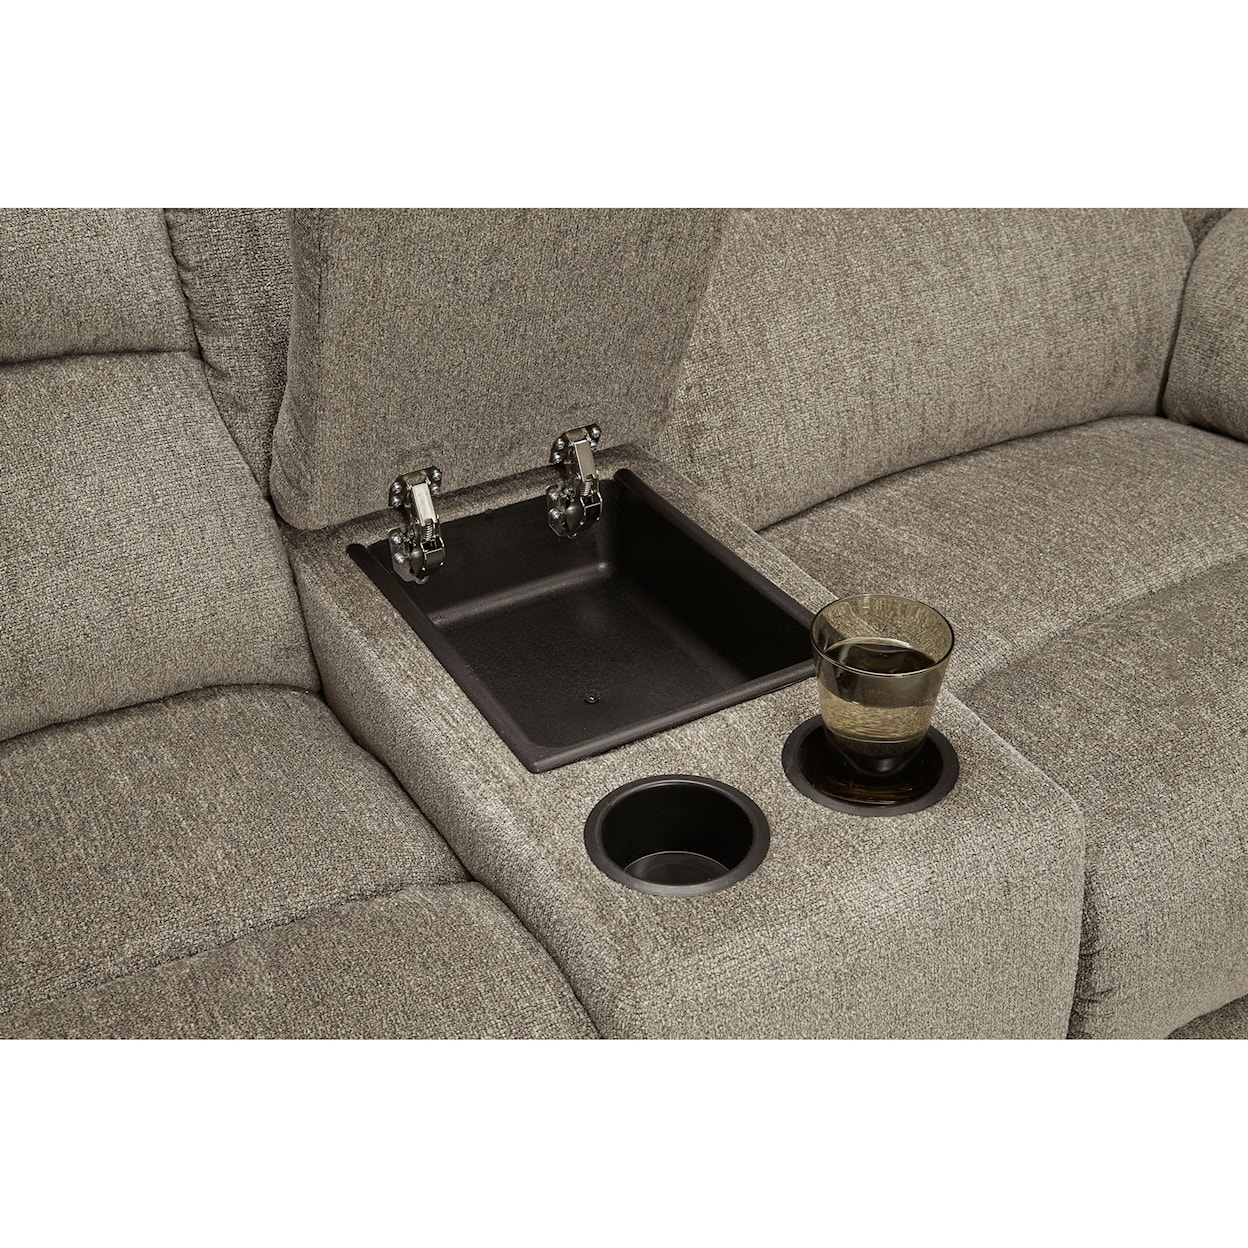 Michael Alan Select Draycoll Double Reclining Loveseat w/ Console